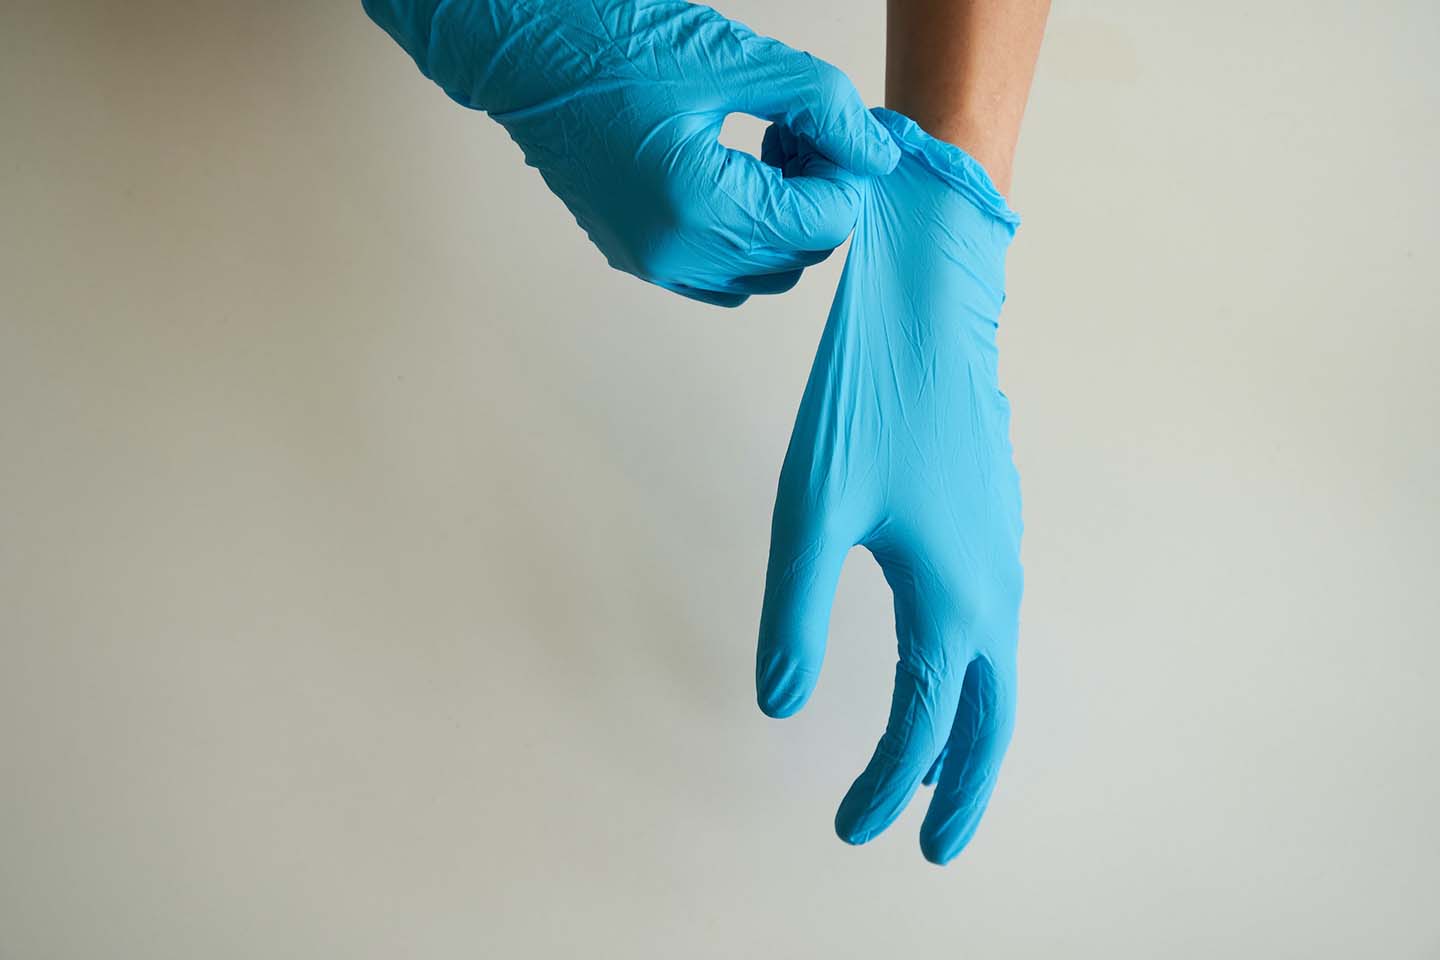 a person donning and pulling the blue nitrile gloves towards arm